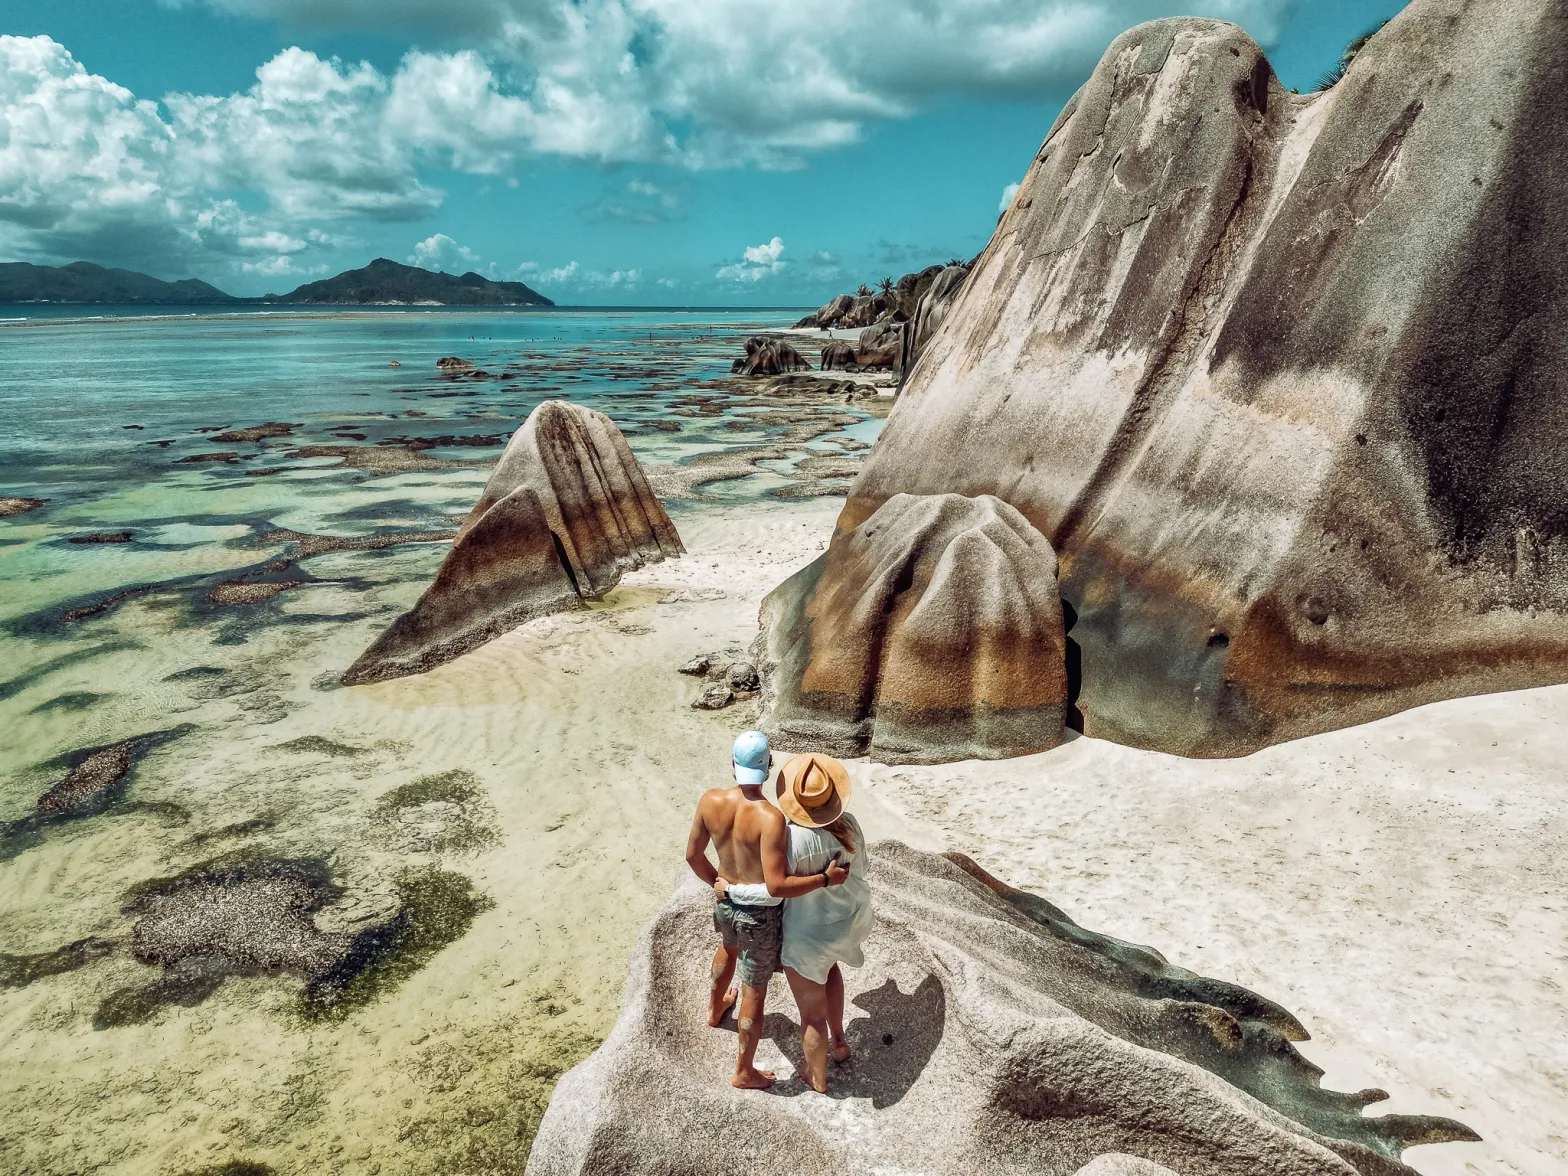 Man and woman standing on a rock looking out to the iconic beach of Anse Source d'Argent on La Digue in the Seychelles, covered in large granite boulders with the sea to the left